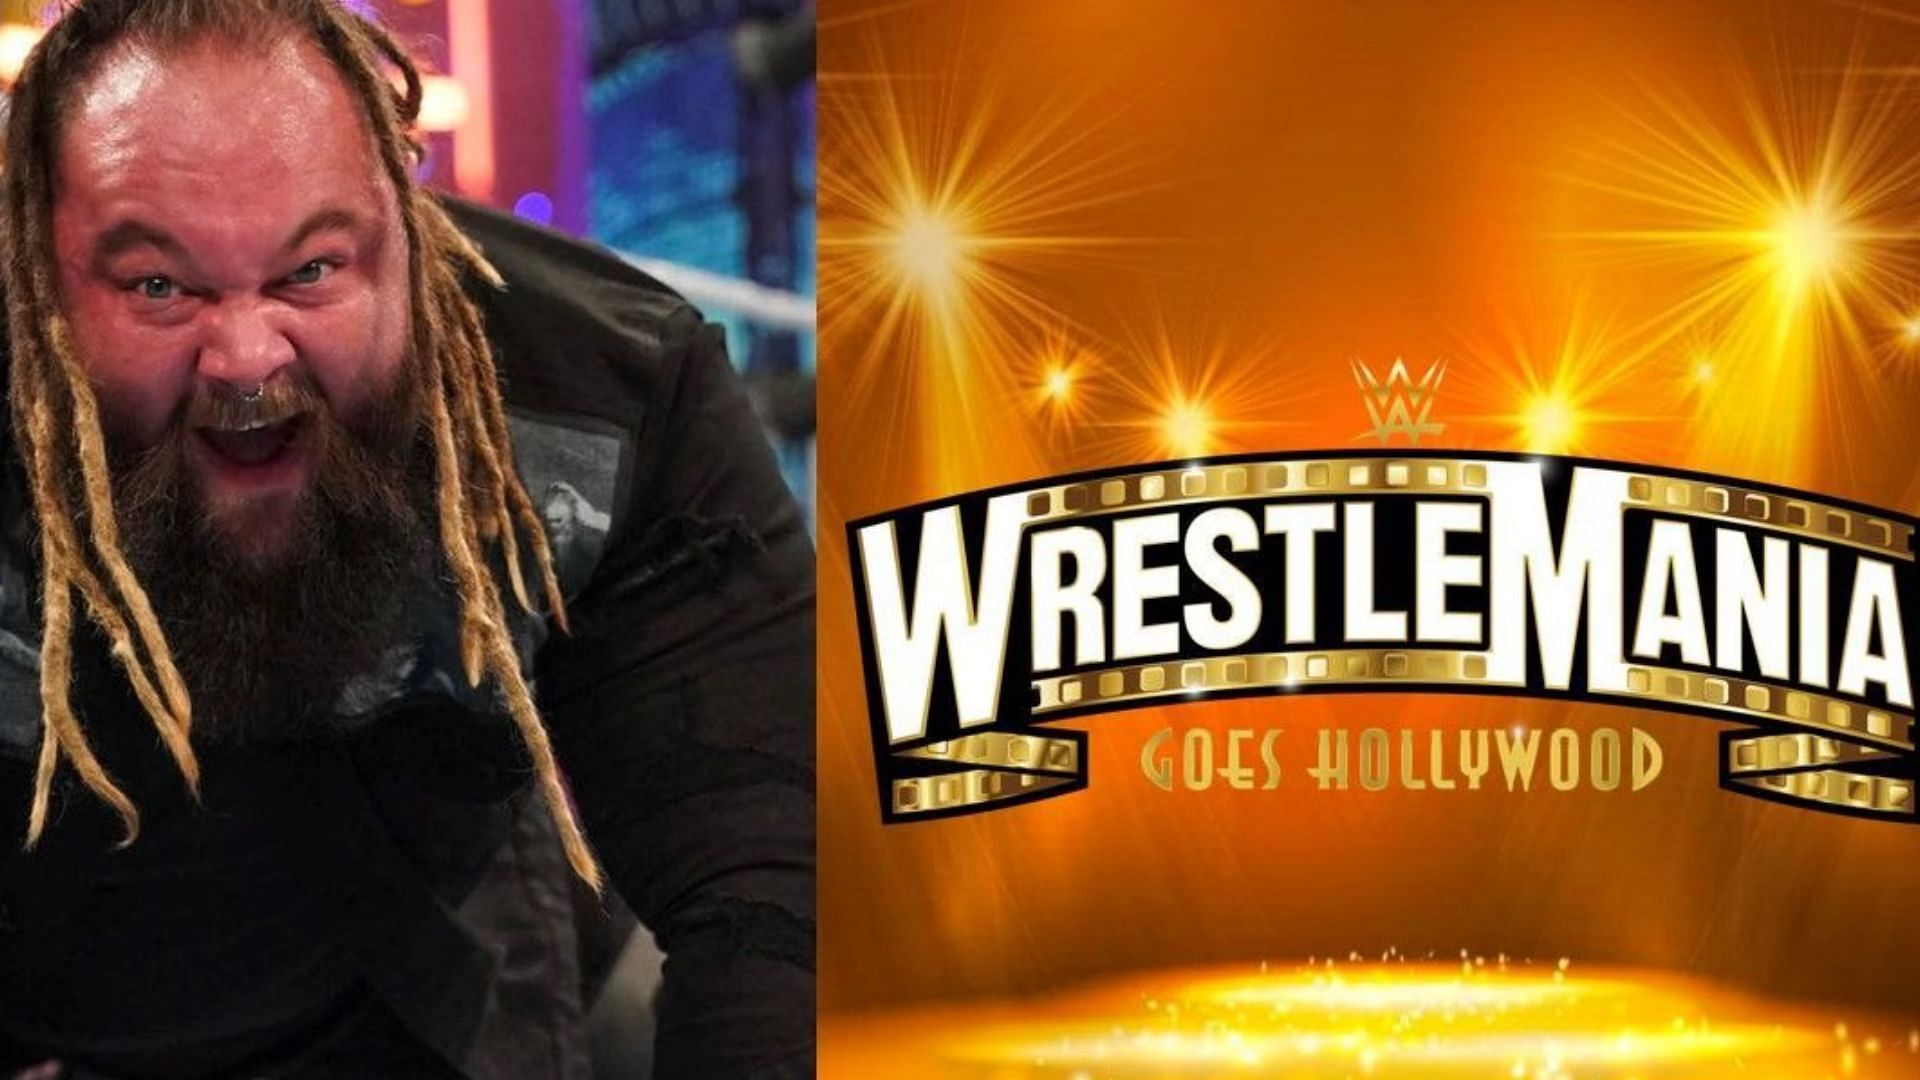 Bray Wyatt returned to WWE at Extreme Rules last year